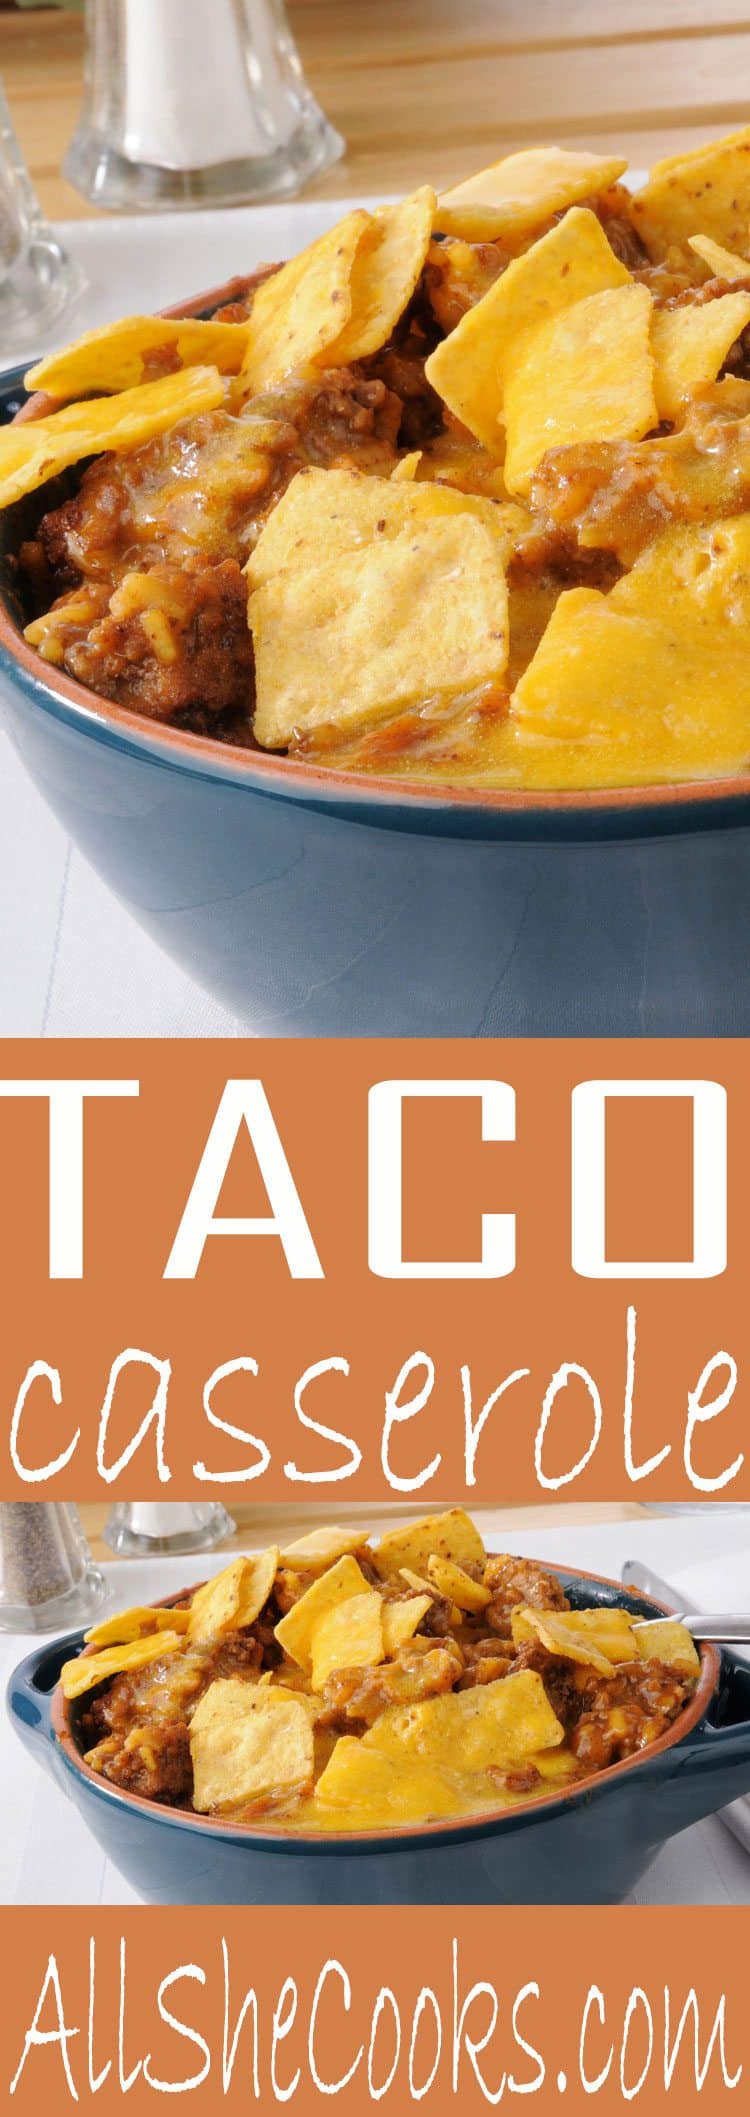 Don't miss this easy weeknight dinner recipe. This is a classic Taco Casserole recipe ground beef that is quick and easy to make on a busy weeknight.